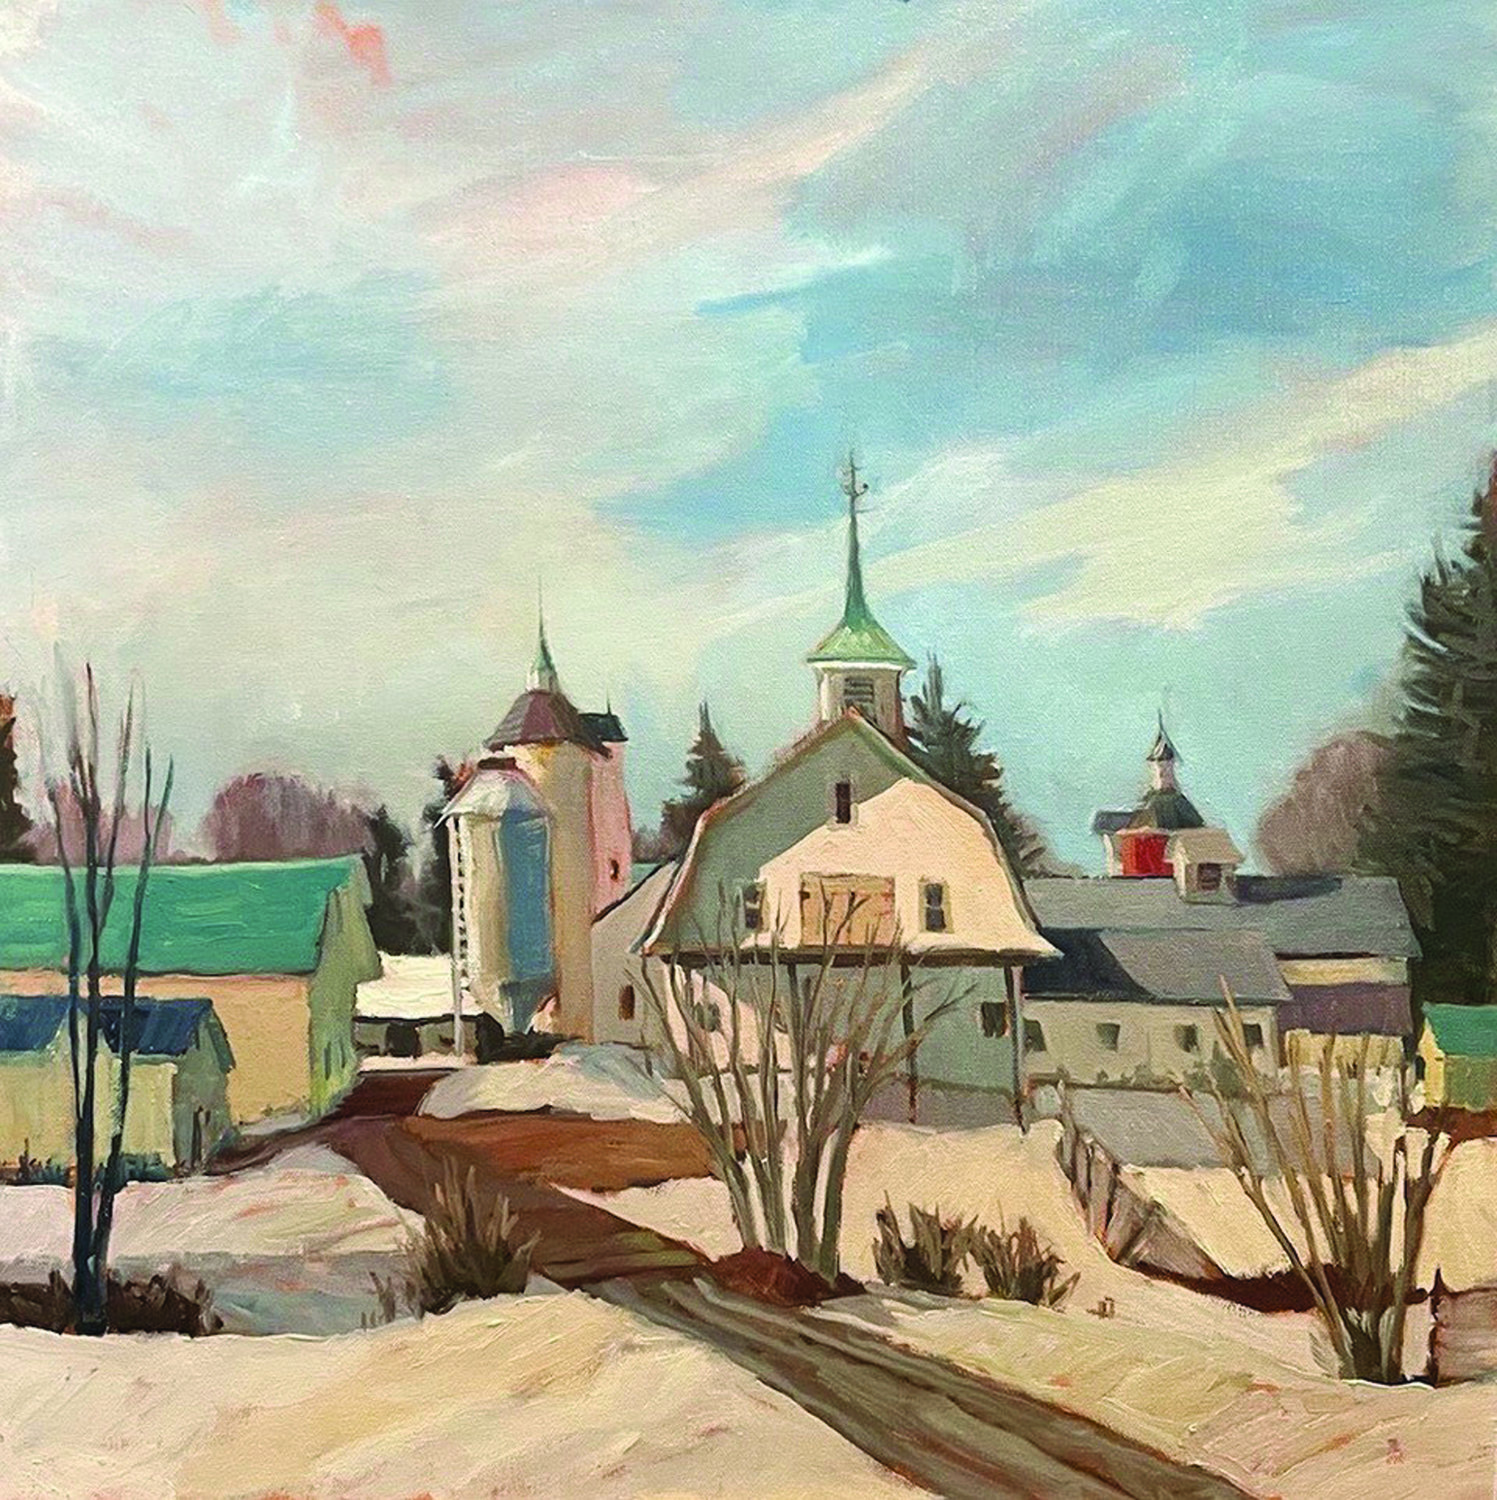 “Elm Grove Winter” is an oil on canvas by Trisha Vergis, part of her solo show at Silverman Gallery.